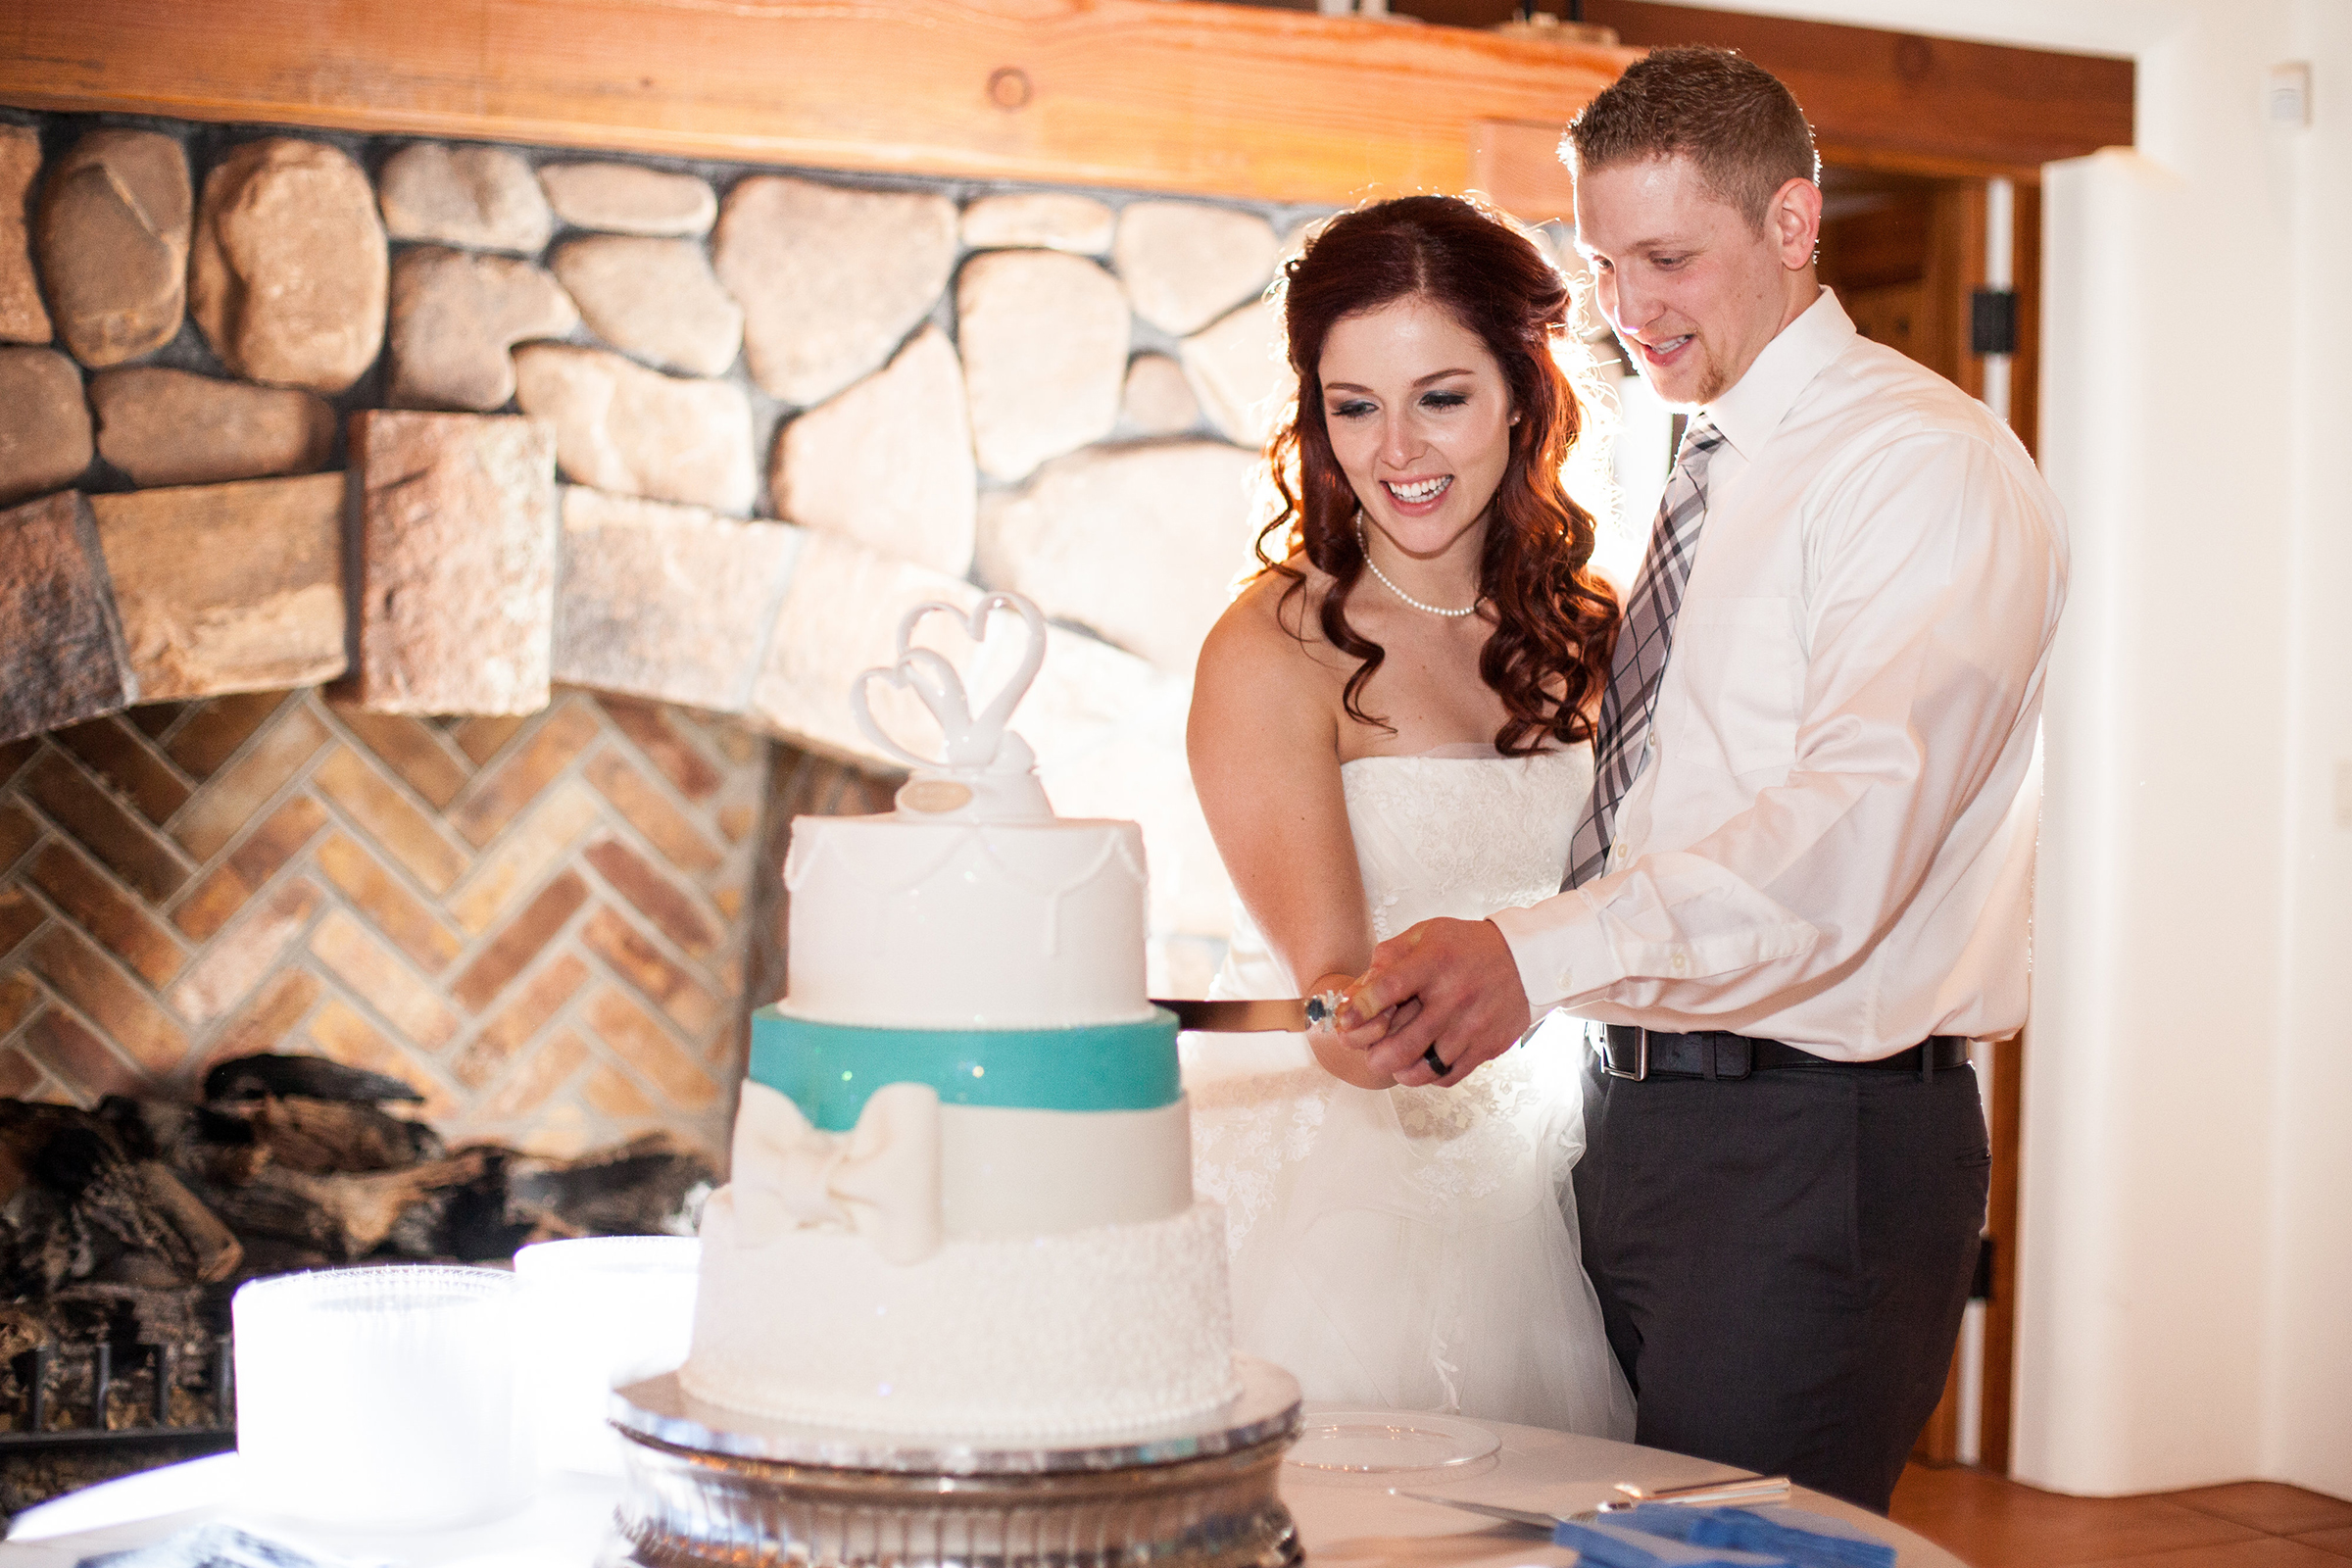 turquoise and white wedding cake cutting with bride and groom